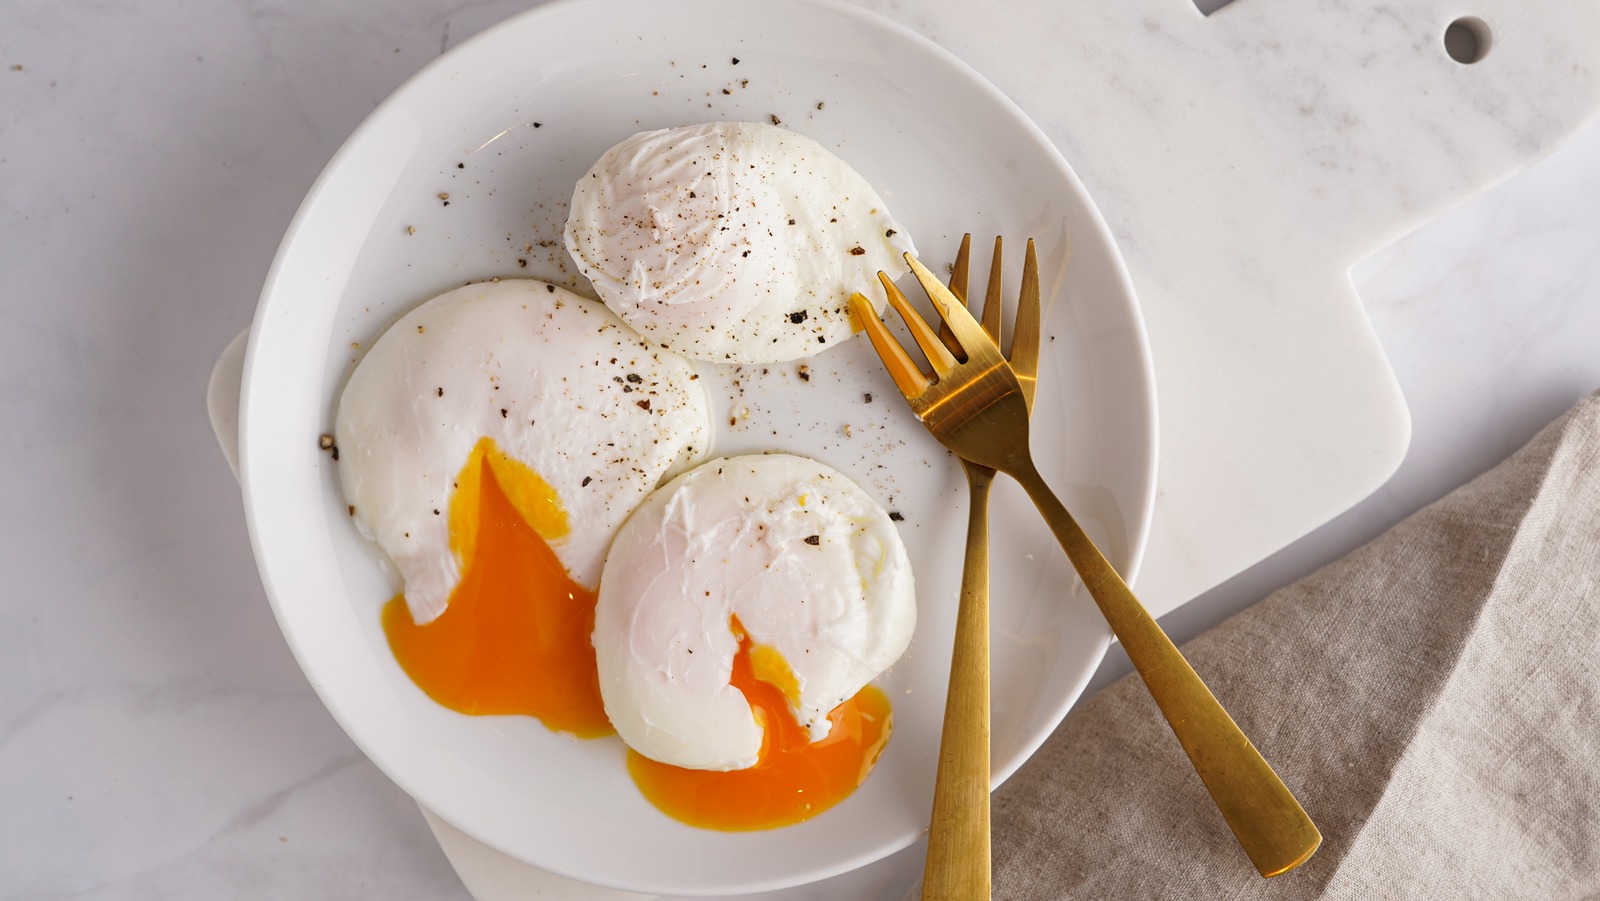 https://www.thedailymeal.com/img/gallery/the-foolproof-cling-film-method-for-perfect-poached-eggs-every-time/l-intro-1679415302.jpg